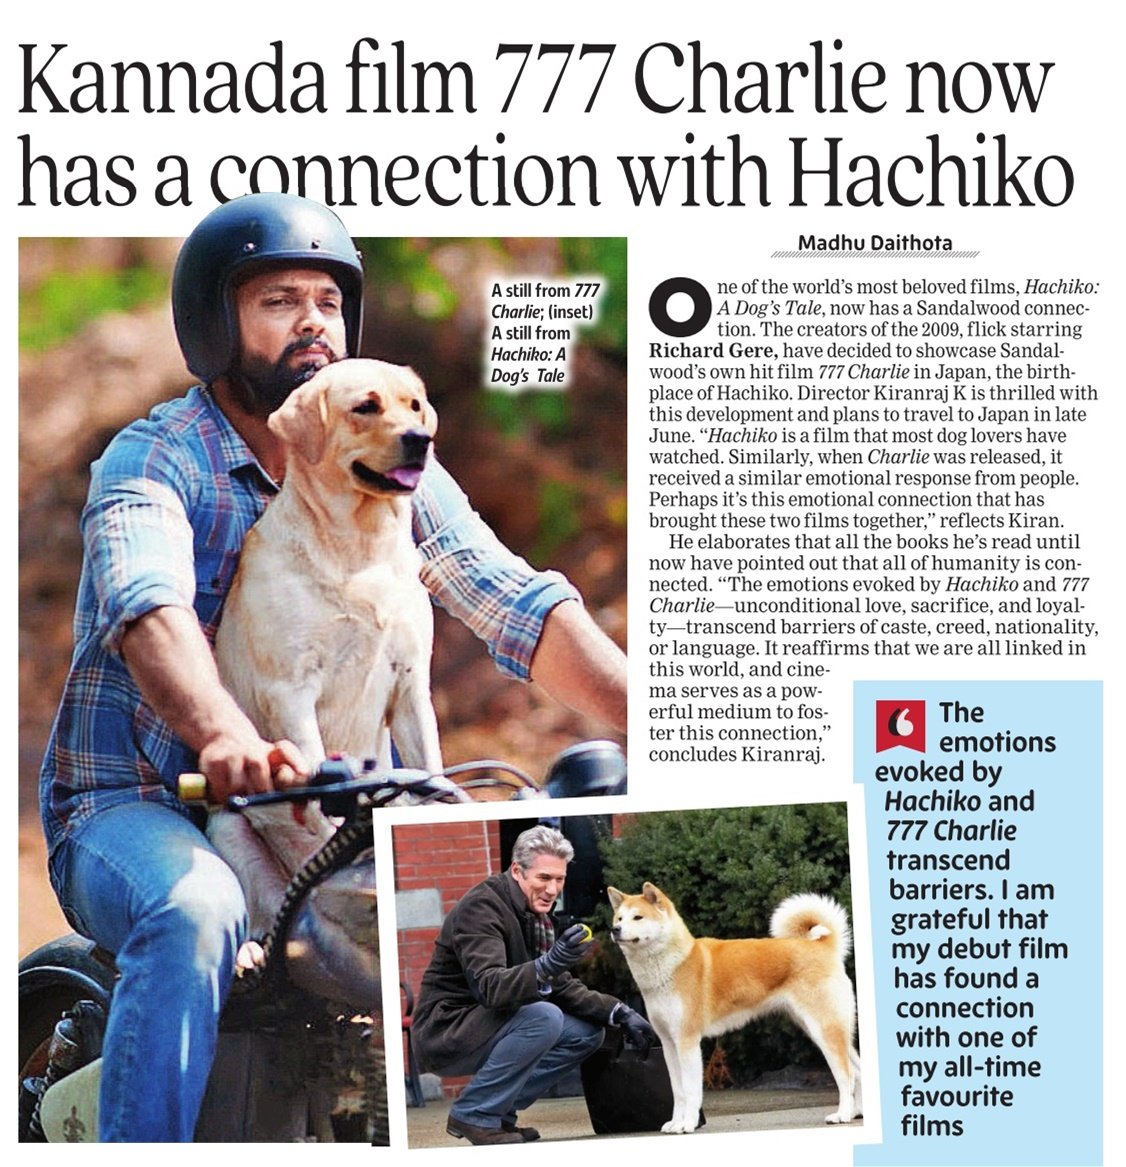 Kannada film 777 Charlie now has a connection with #Hachiko

#777Charlie #Charlie777 
#RakshitShetty @rakshitshetty